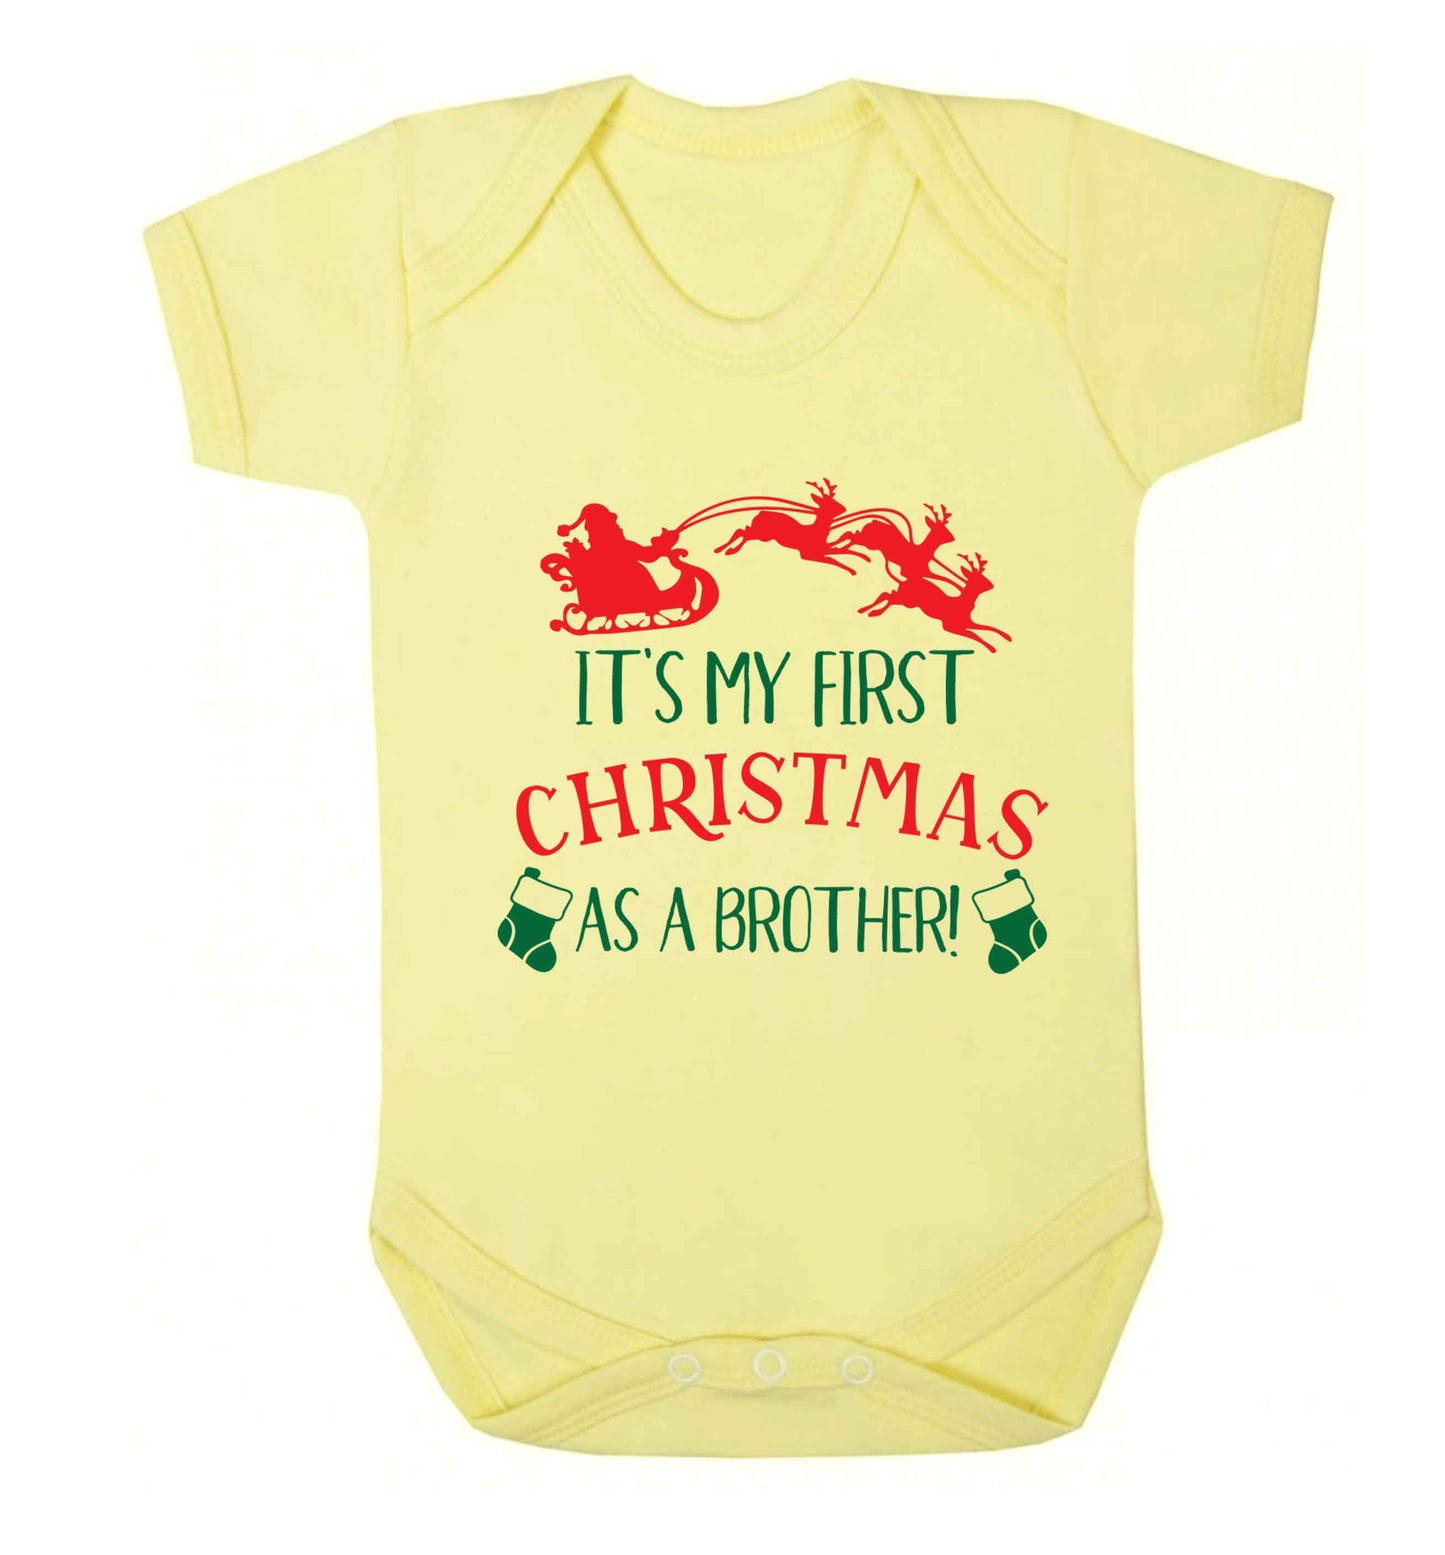 It's my first Christmas as a brother! Baby Vest pale yellow 18-24 months